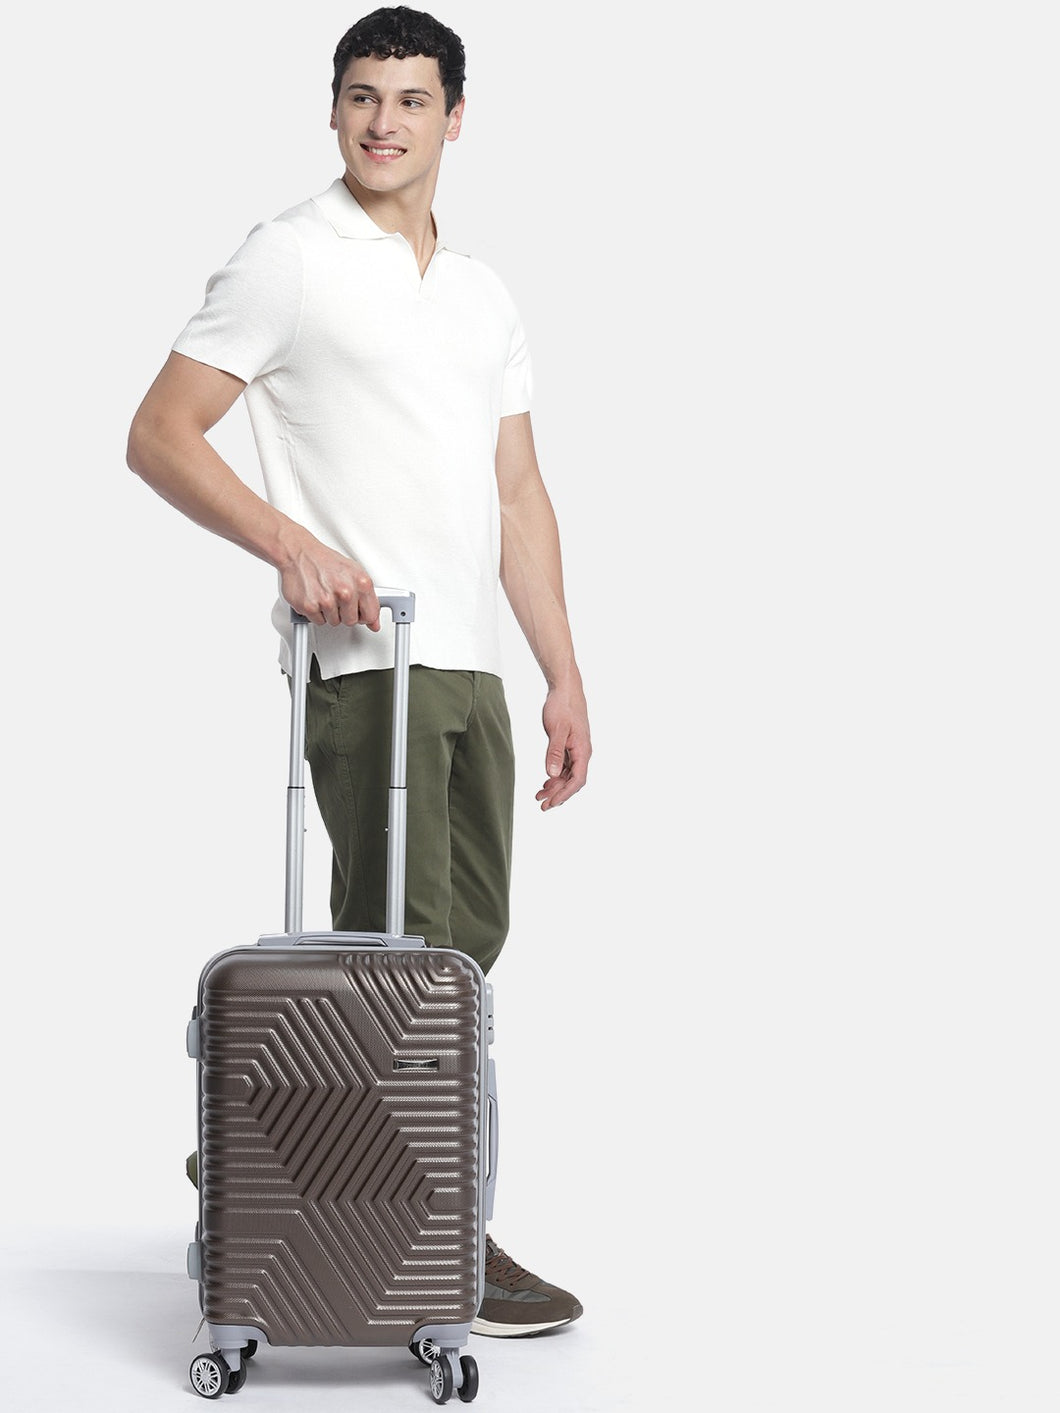 Brown-Toned Textured Hard-Sided Cabin Trolley Suitcase